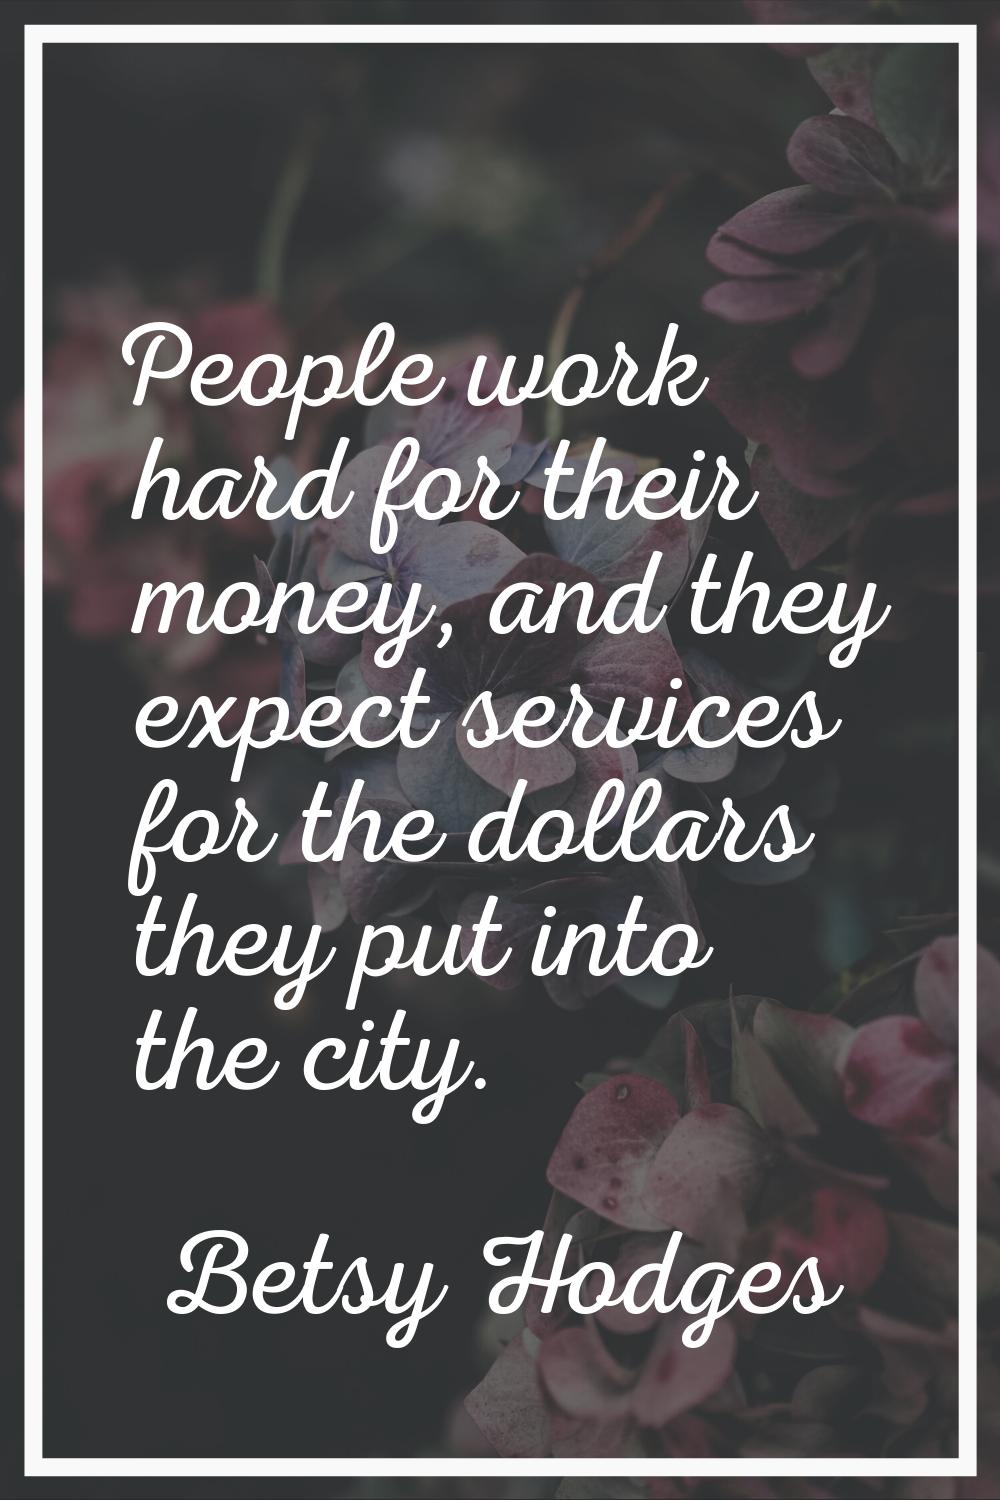 People work hard for their money, and they expect services for the dollars they put into the city.